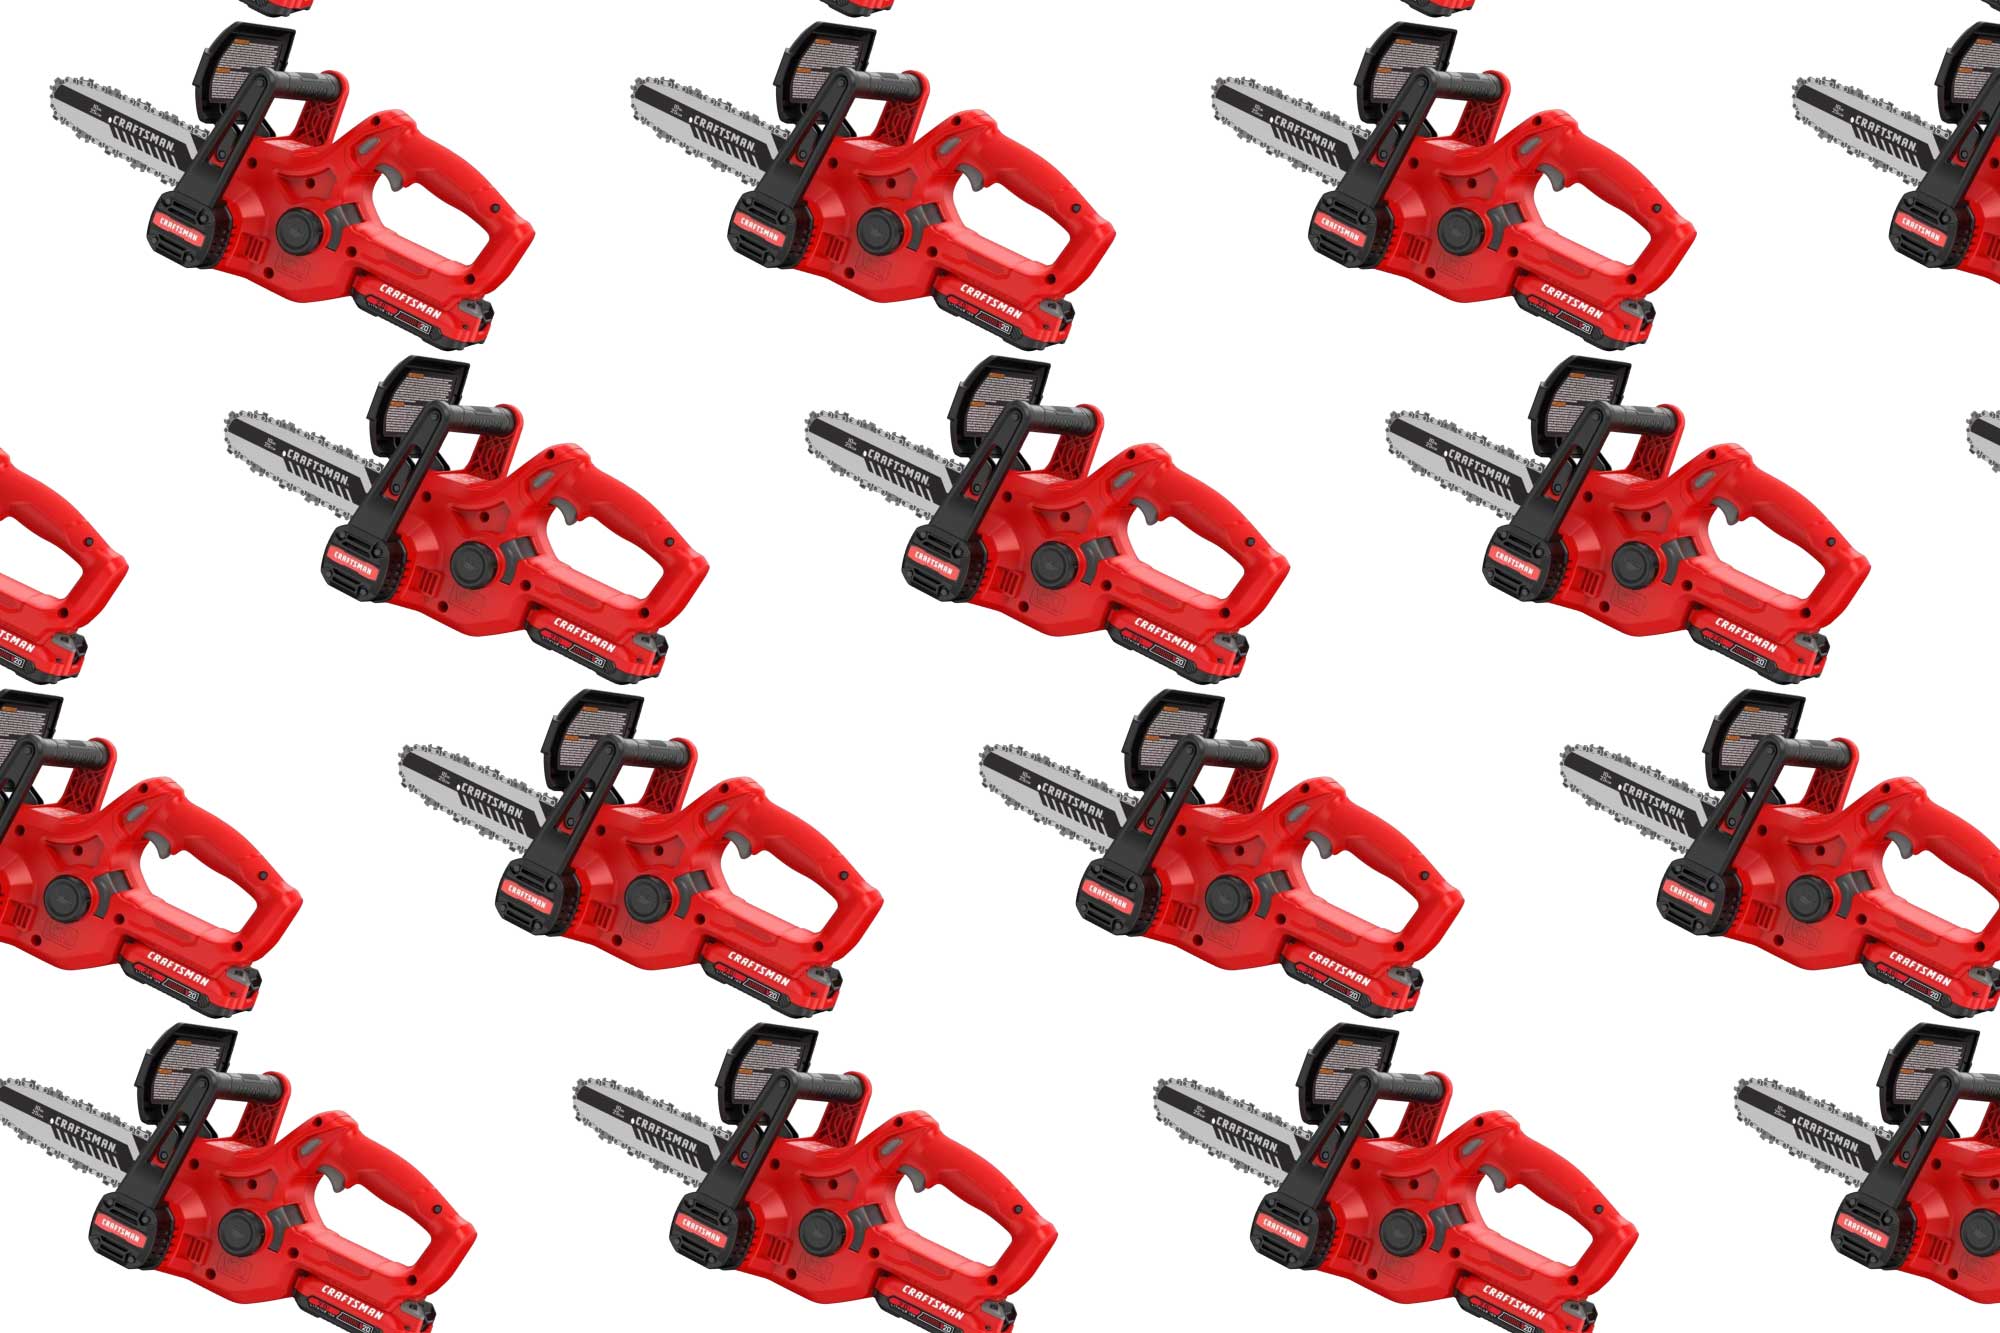 Tackle small trees with 30% off this mini Craftsman chainsaw at Amazon